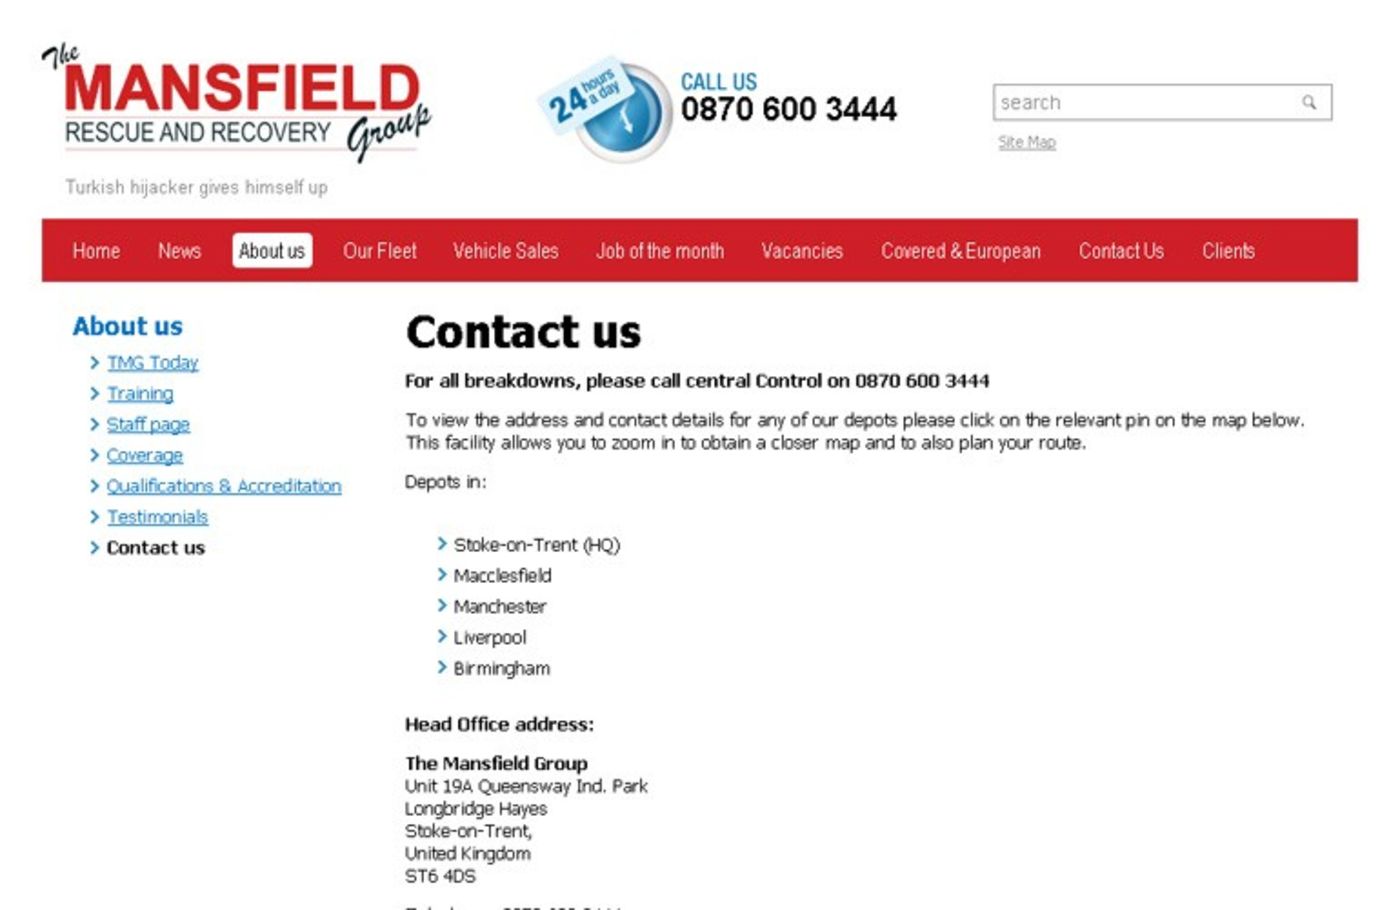 The Mansfield Group Contact us